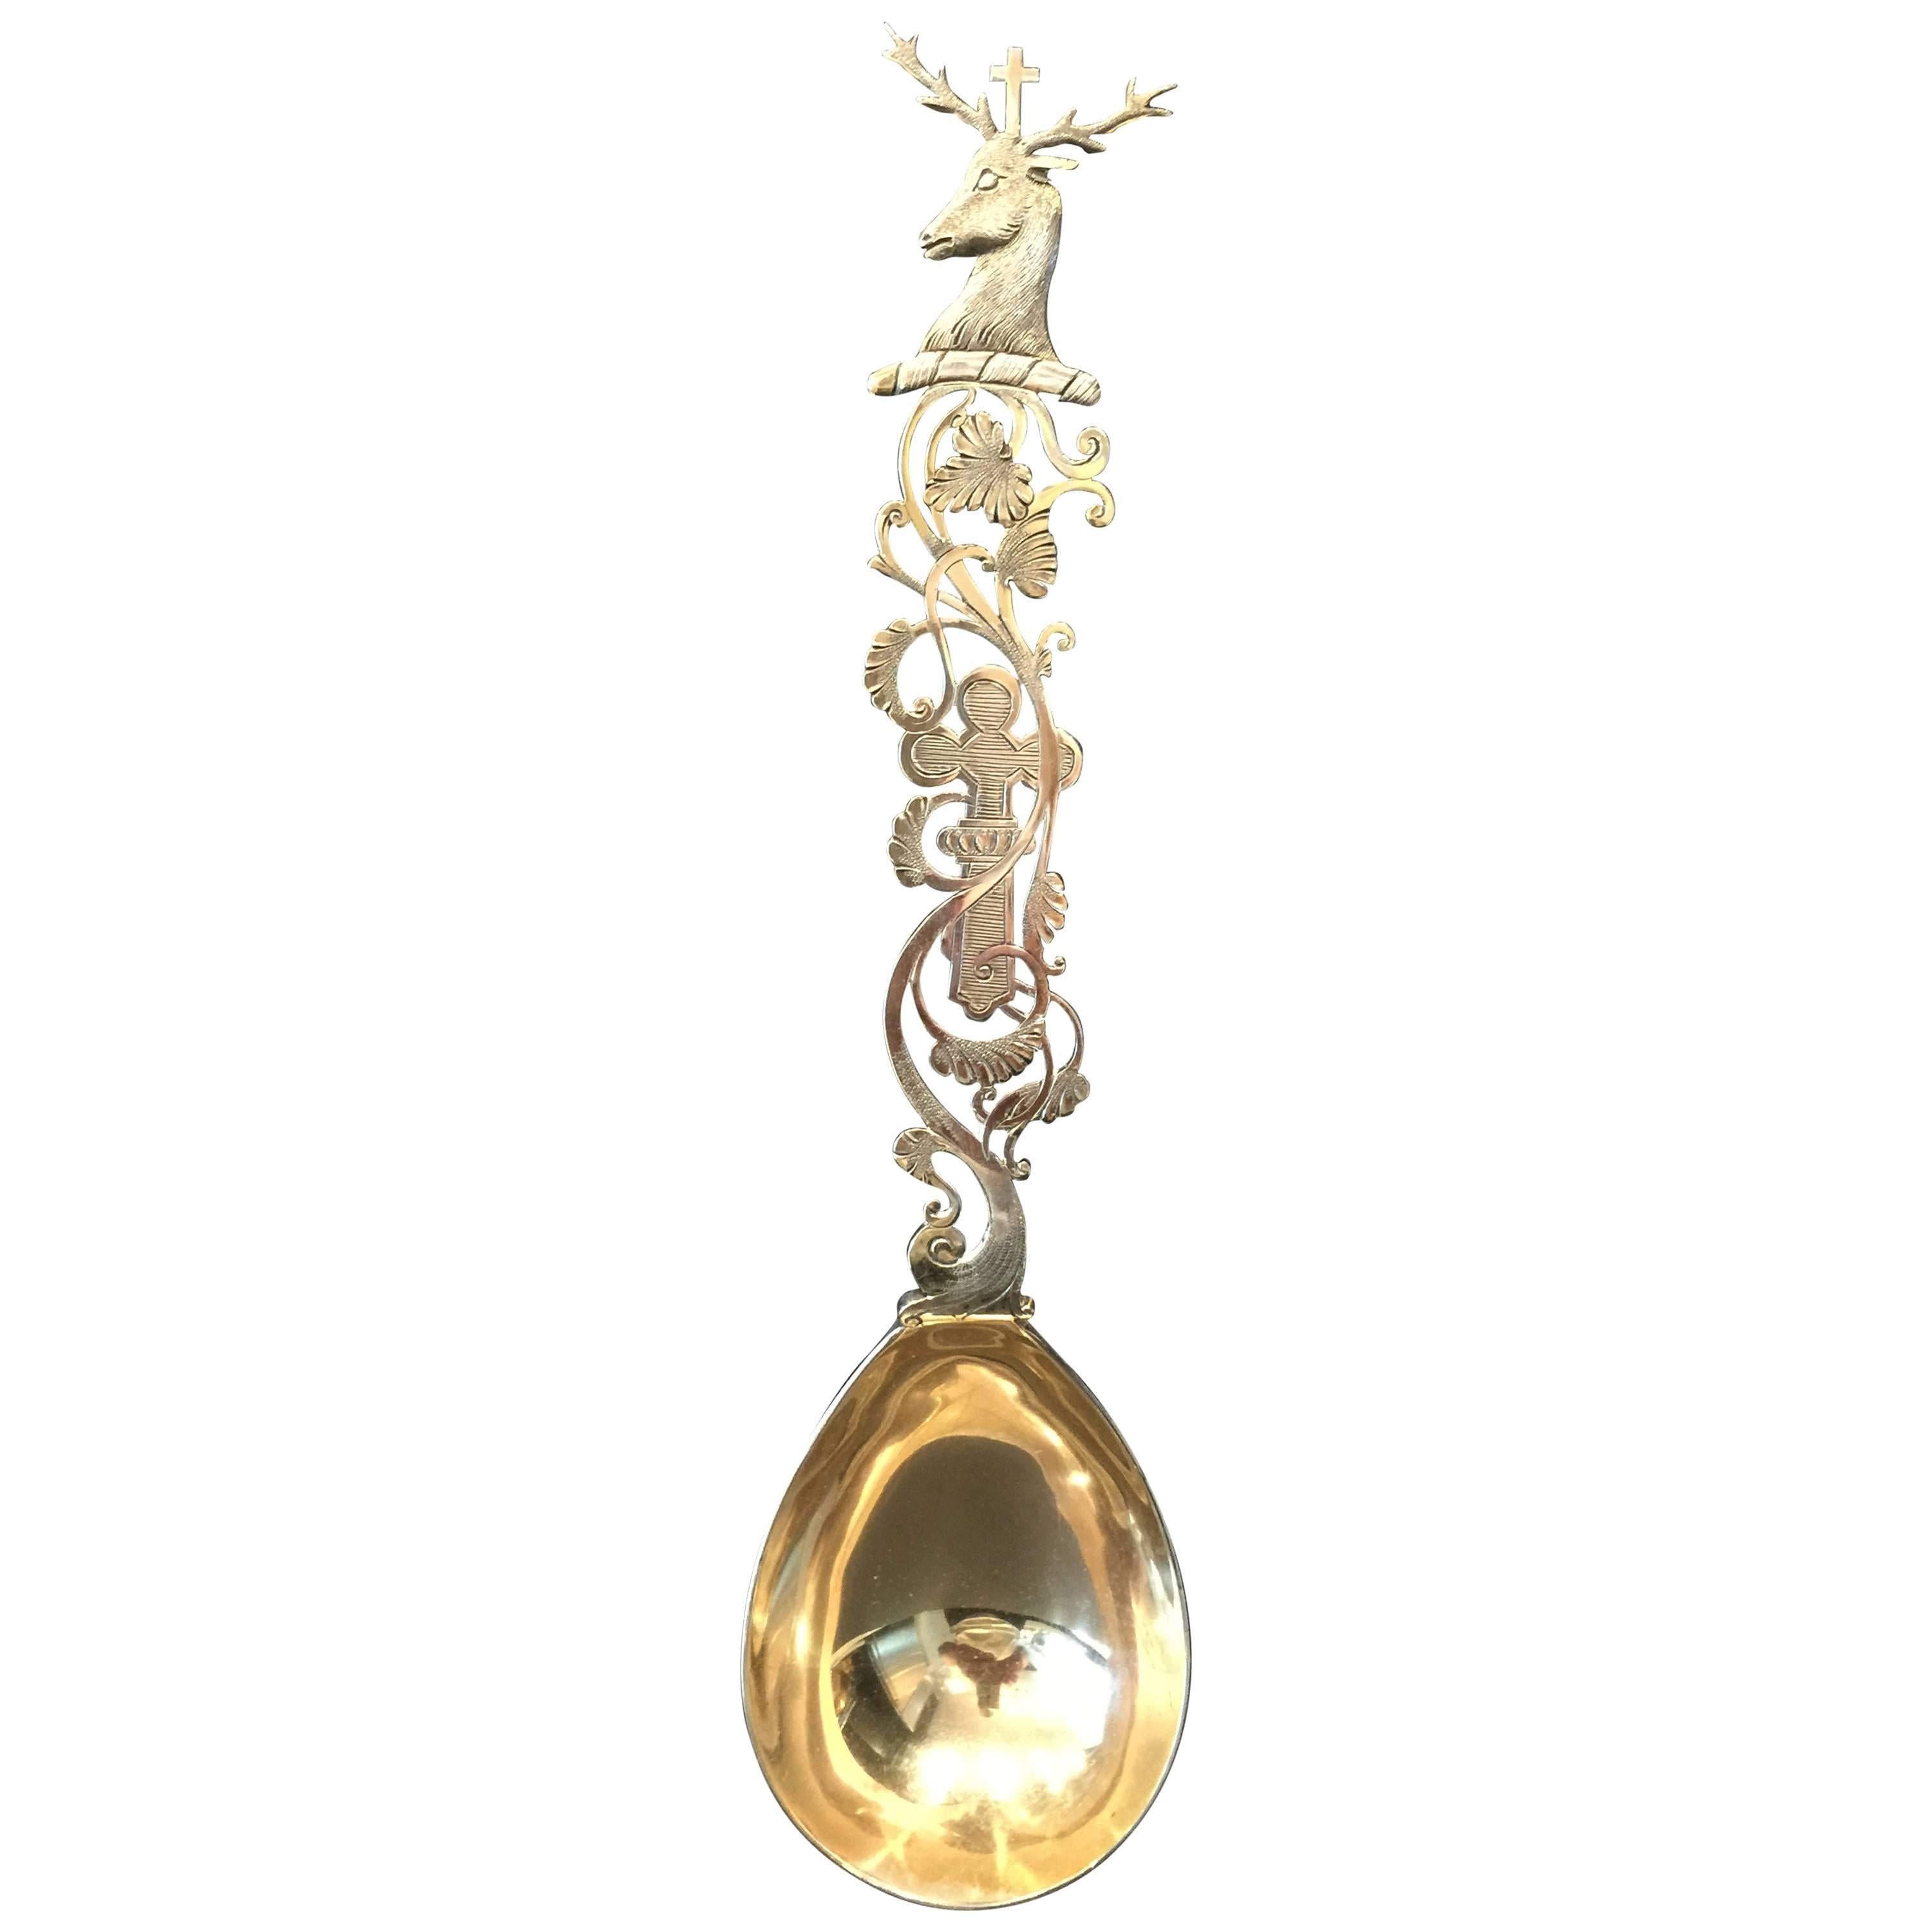  Sterling Ecclesiastical Christening Spoon